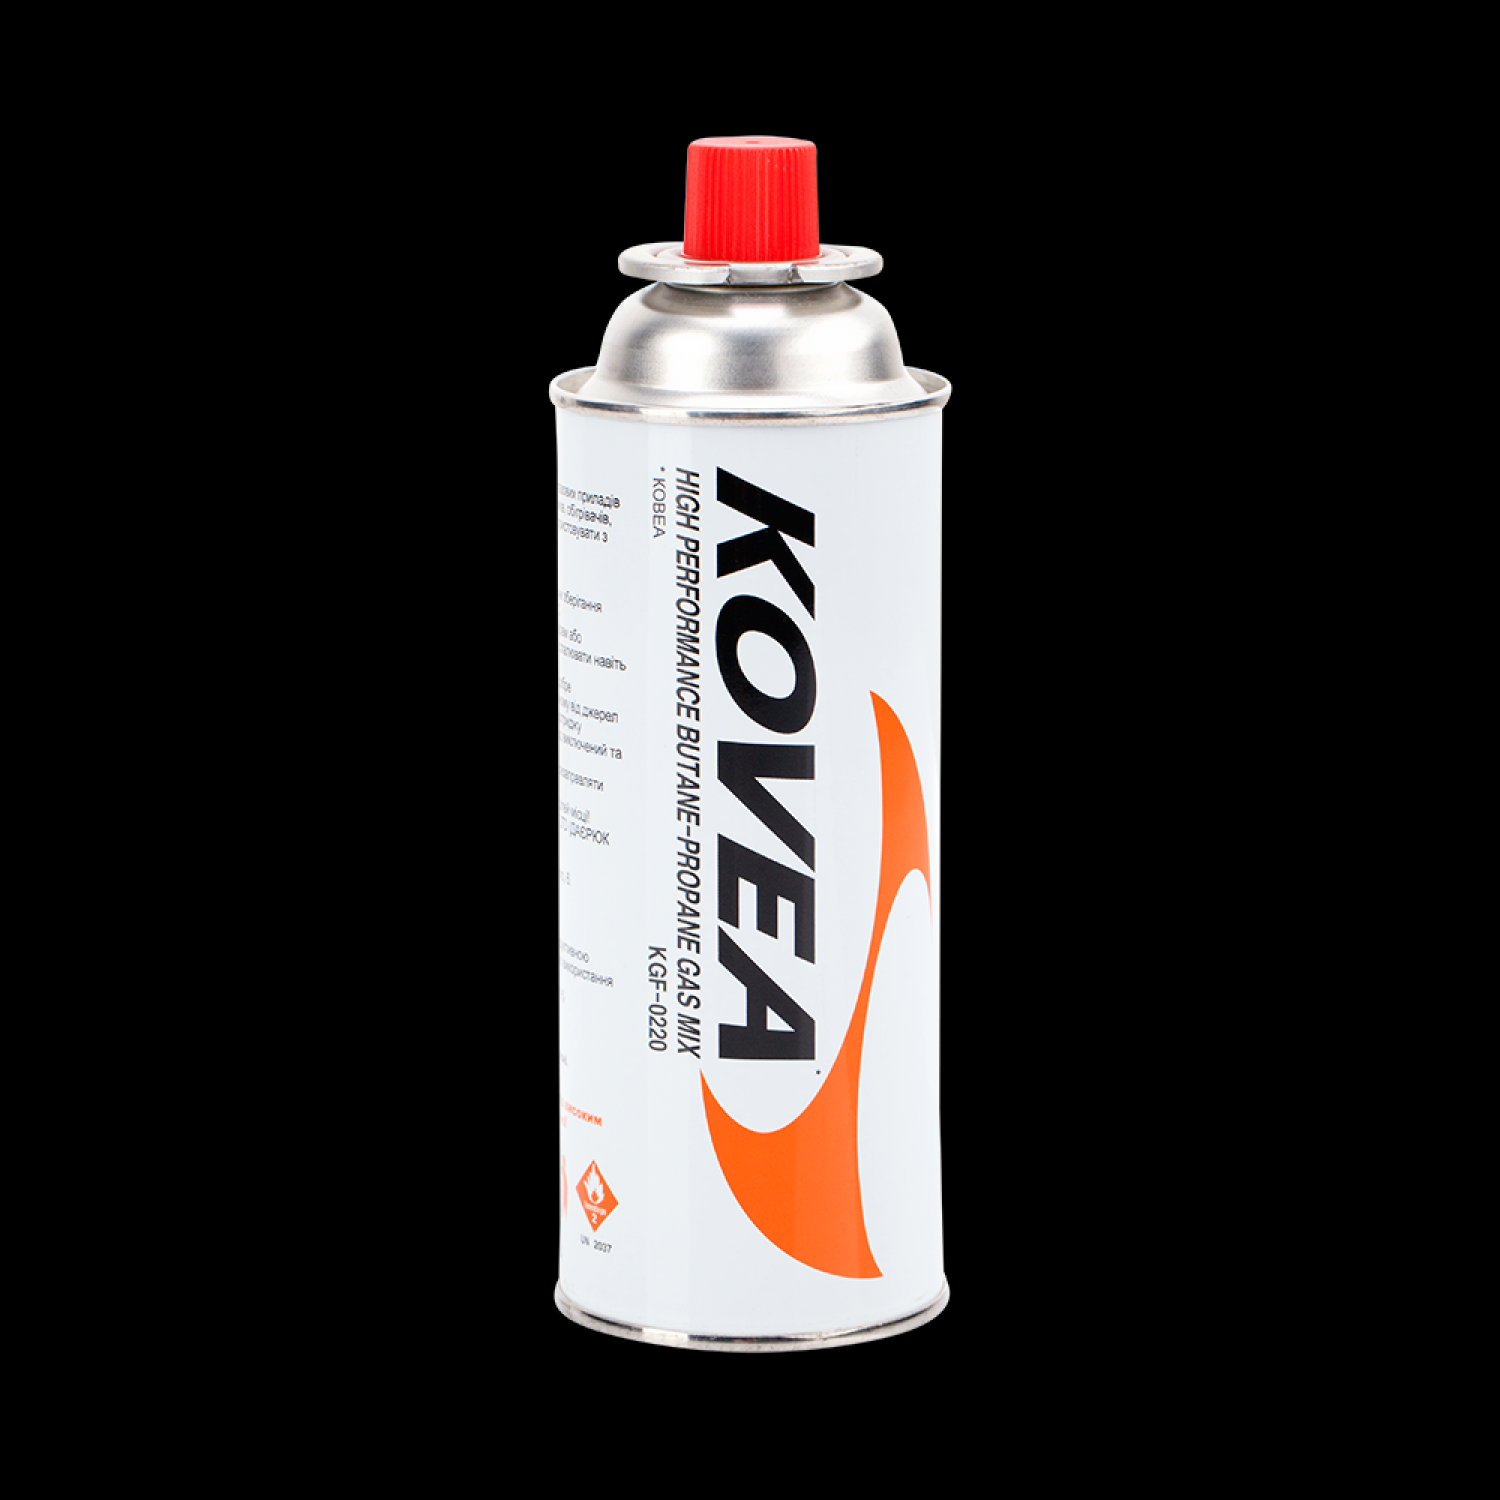 KOVEA GAS CANISTER 250G